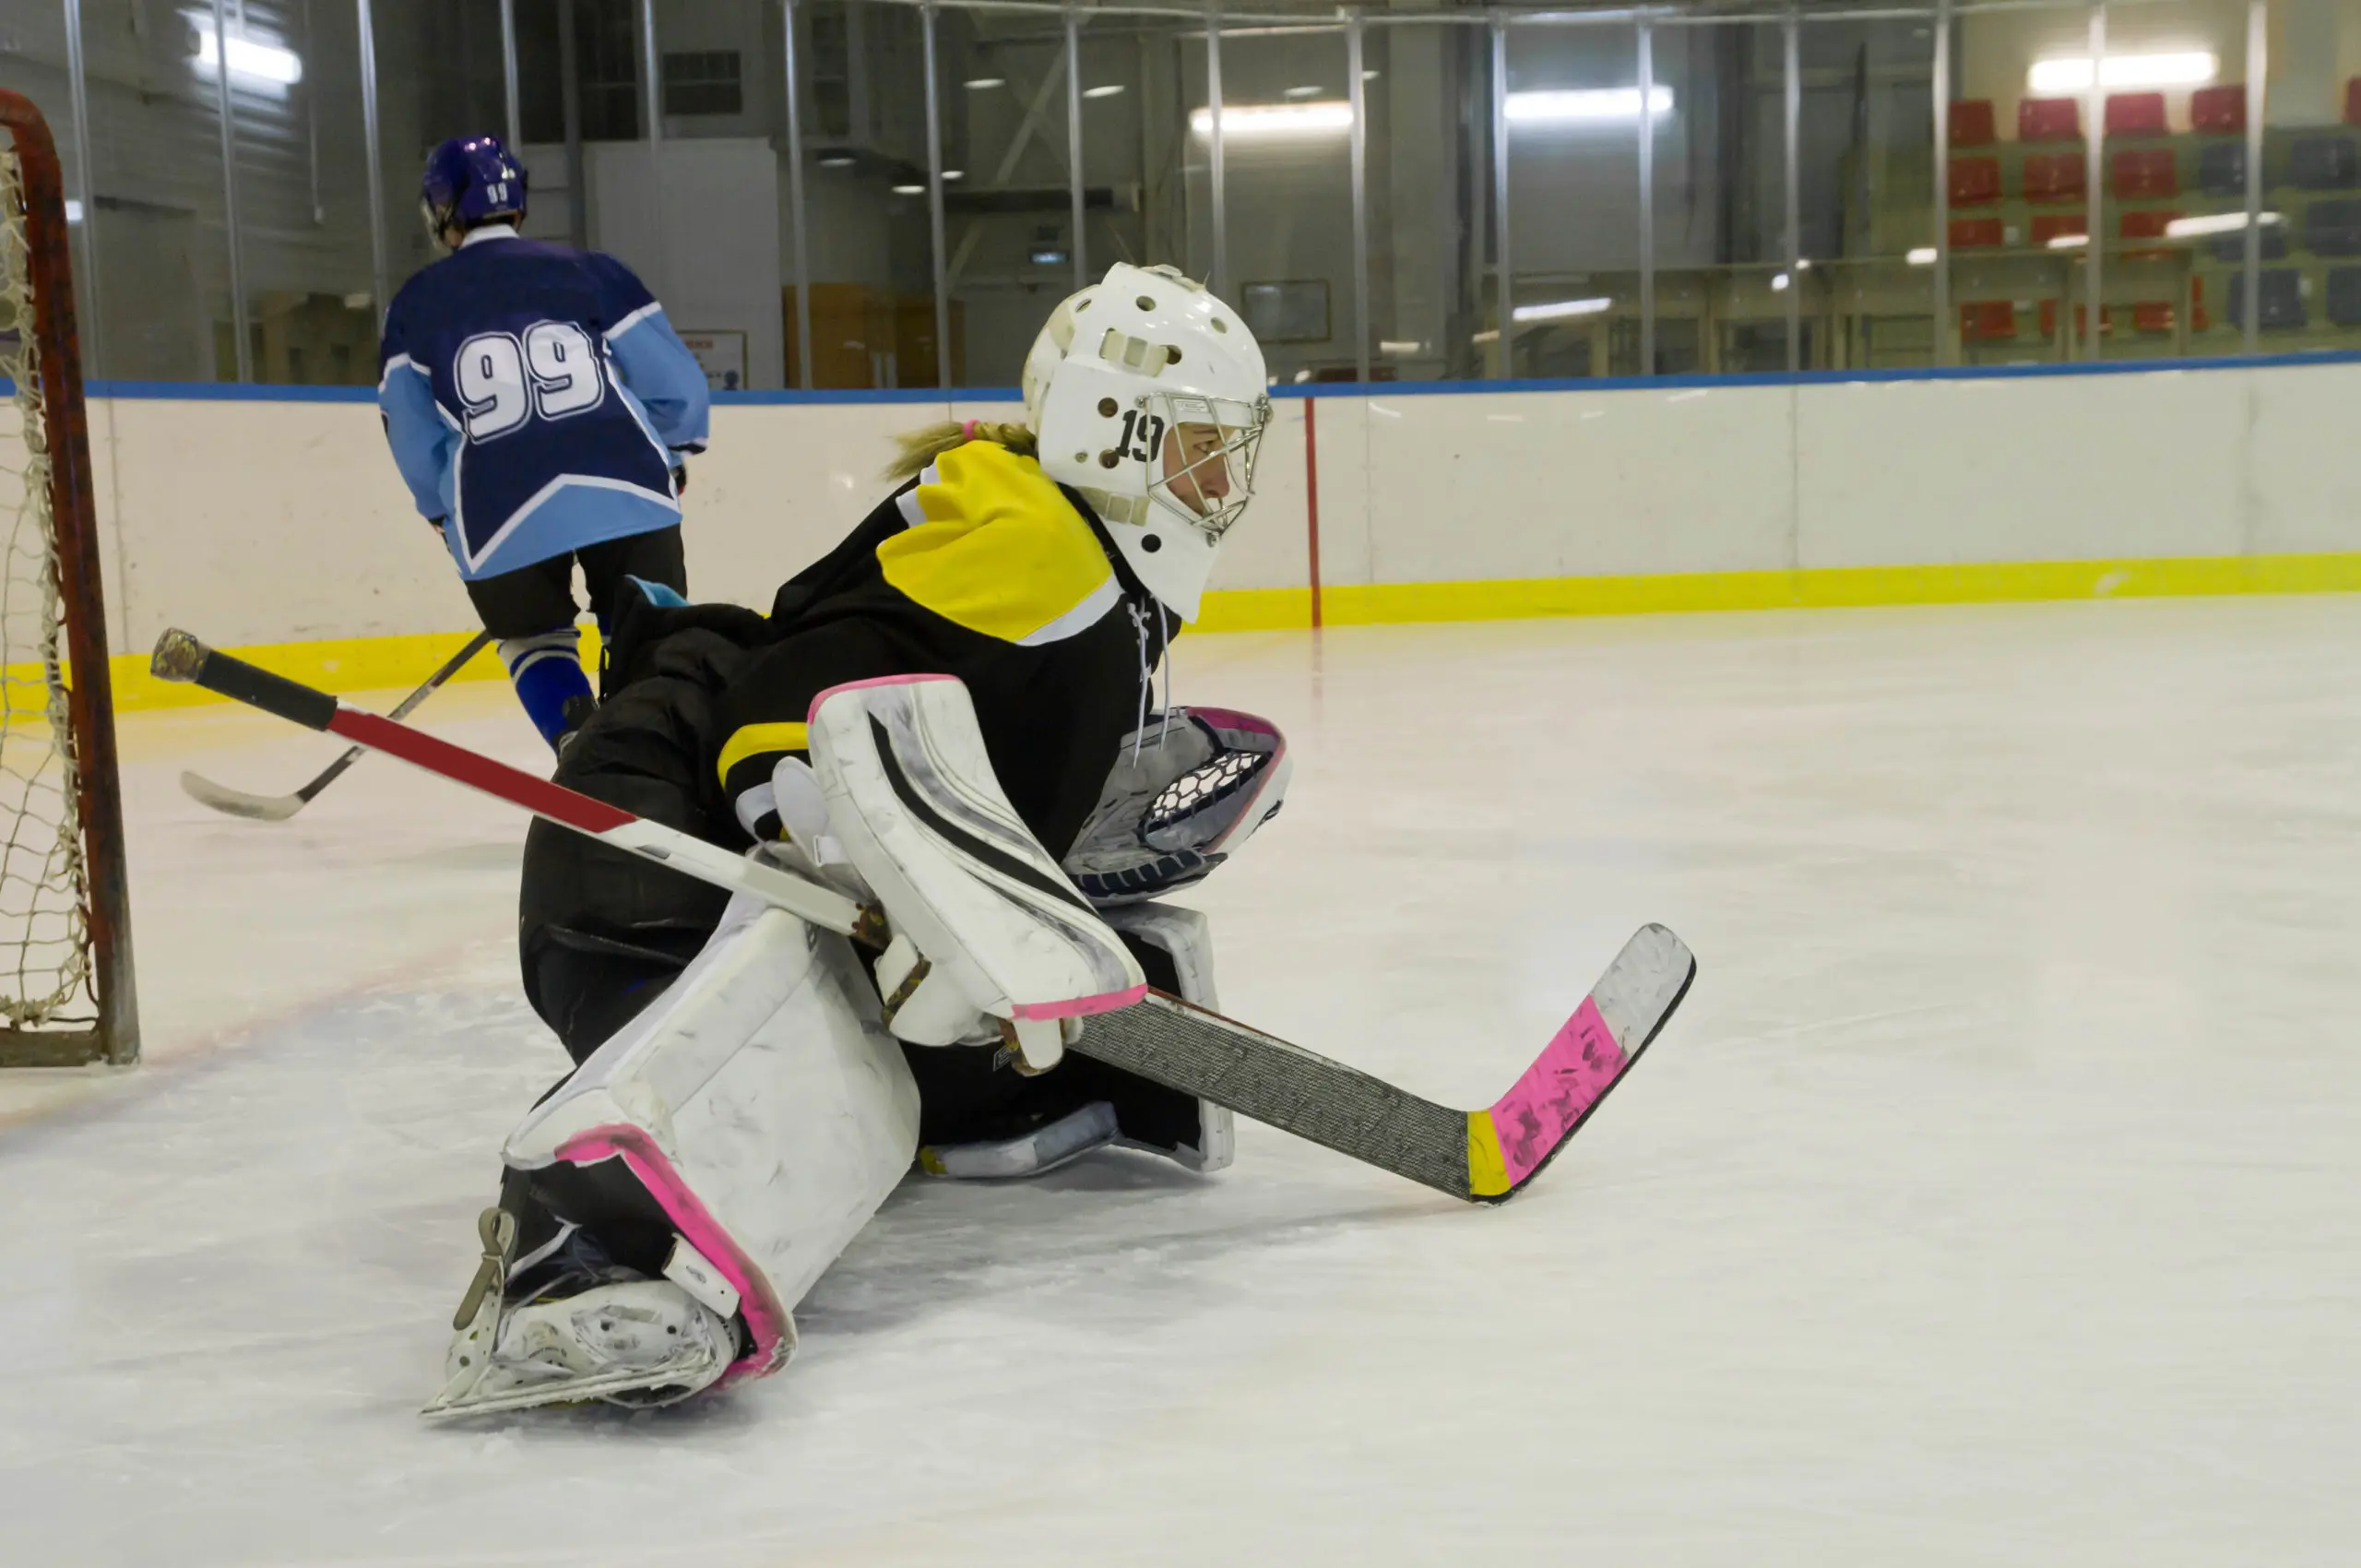 Featured image: Improve Your Ice Hockey Performance With These 4 Stretches